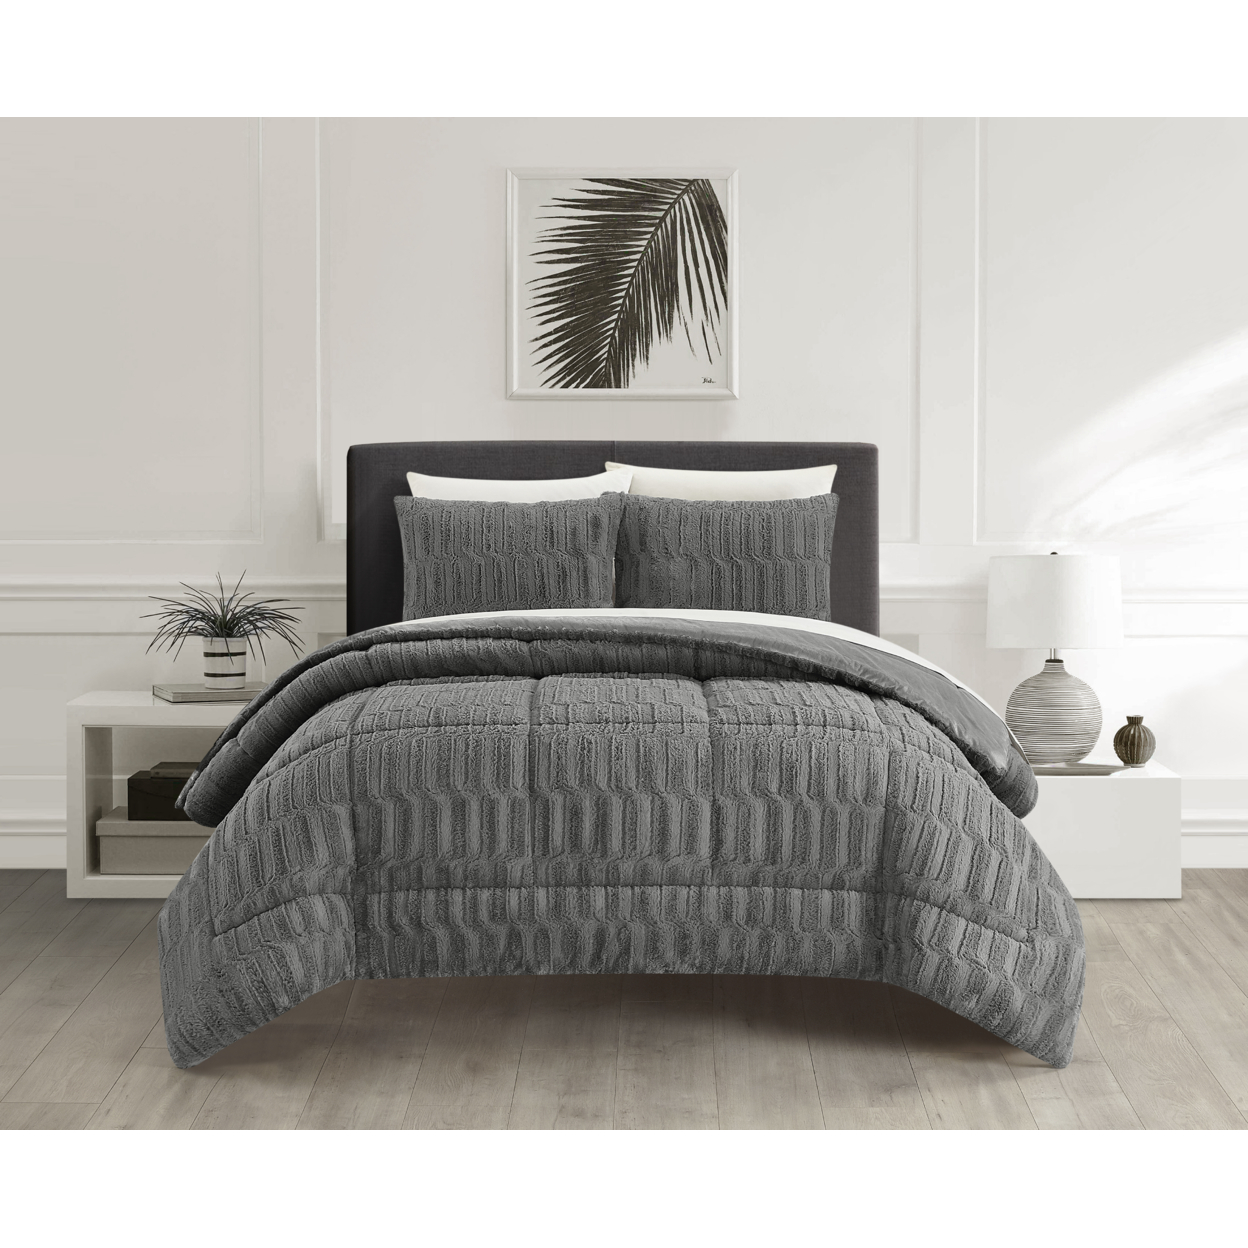 Farca 3 Or 2 Piece Comforter Textured Geometric Pattern Faux Micro-Mink Backing - Grey, Queen - 3 Piece